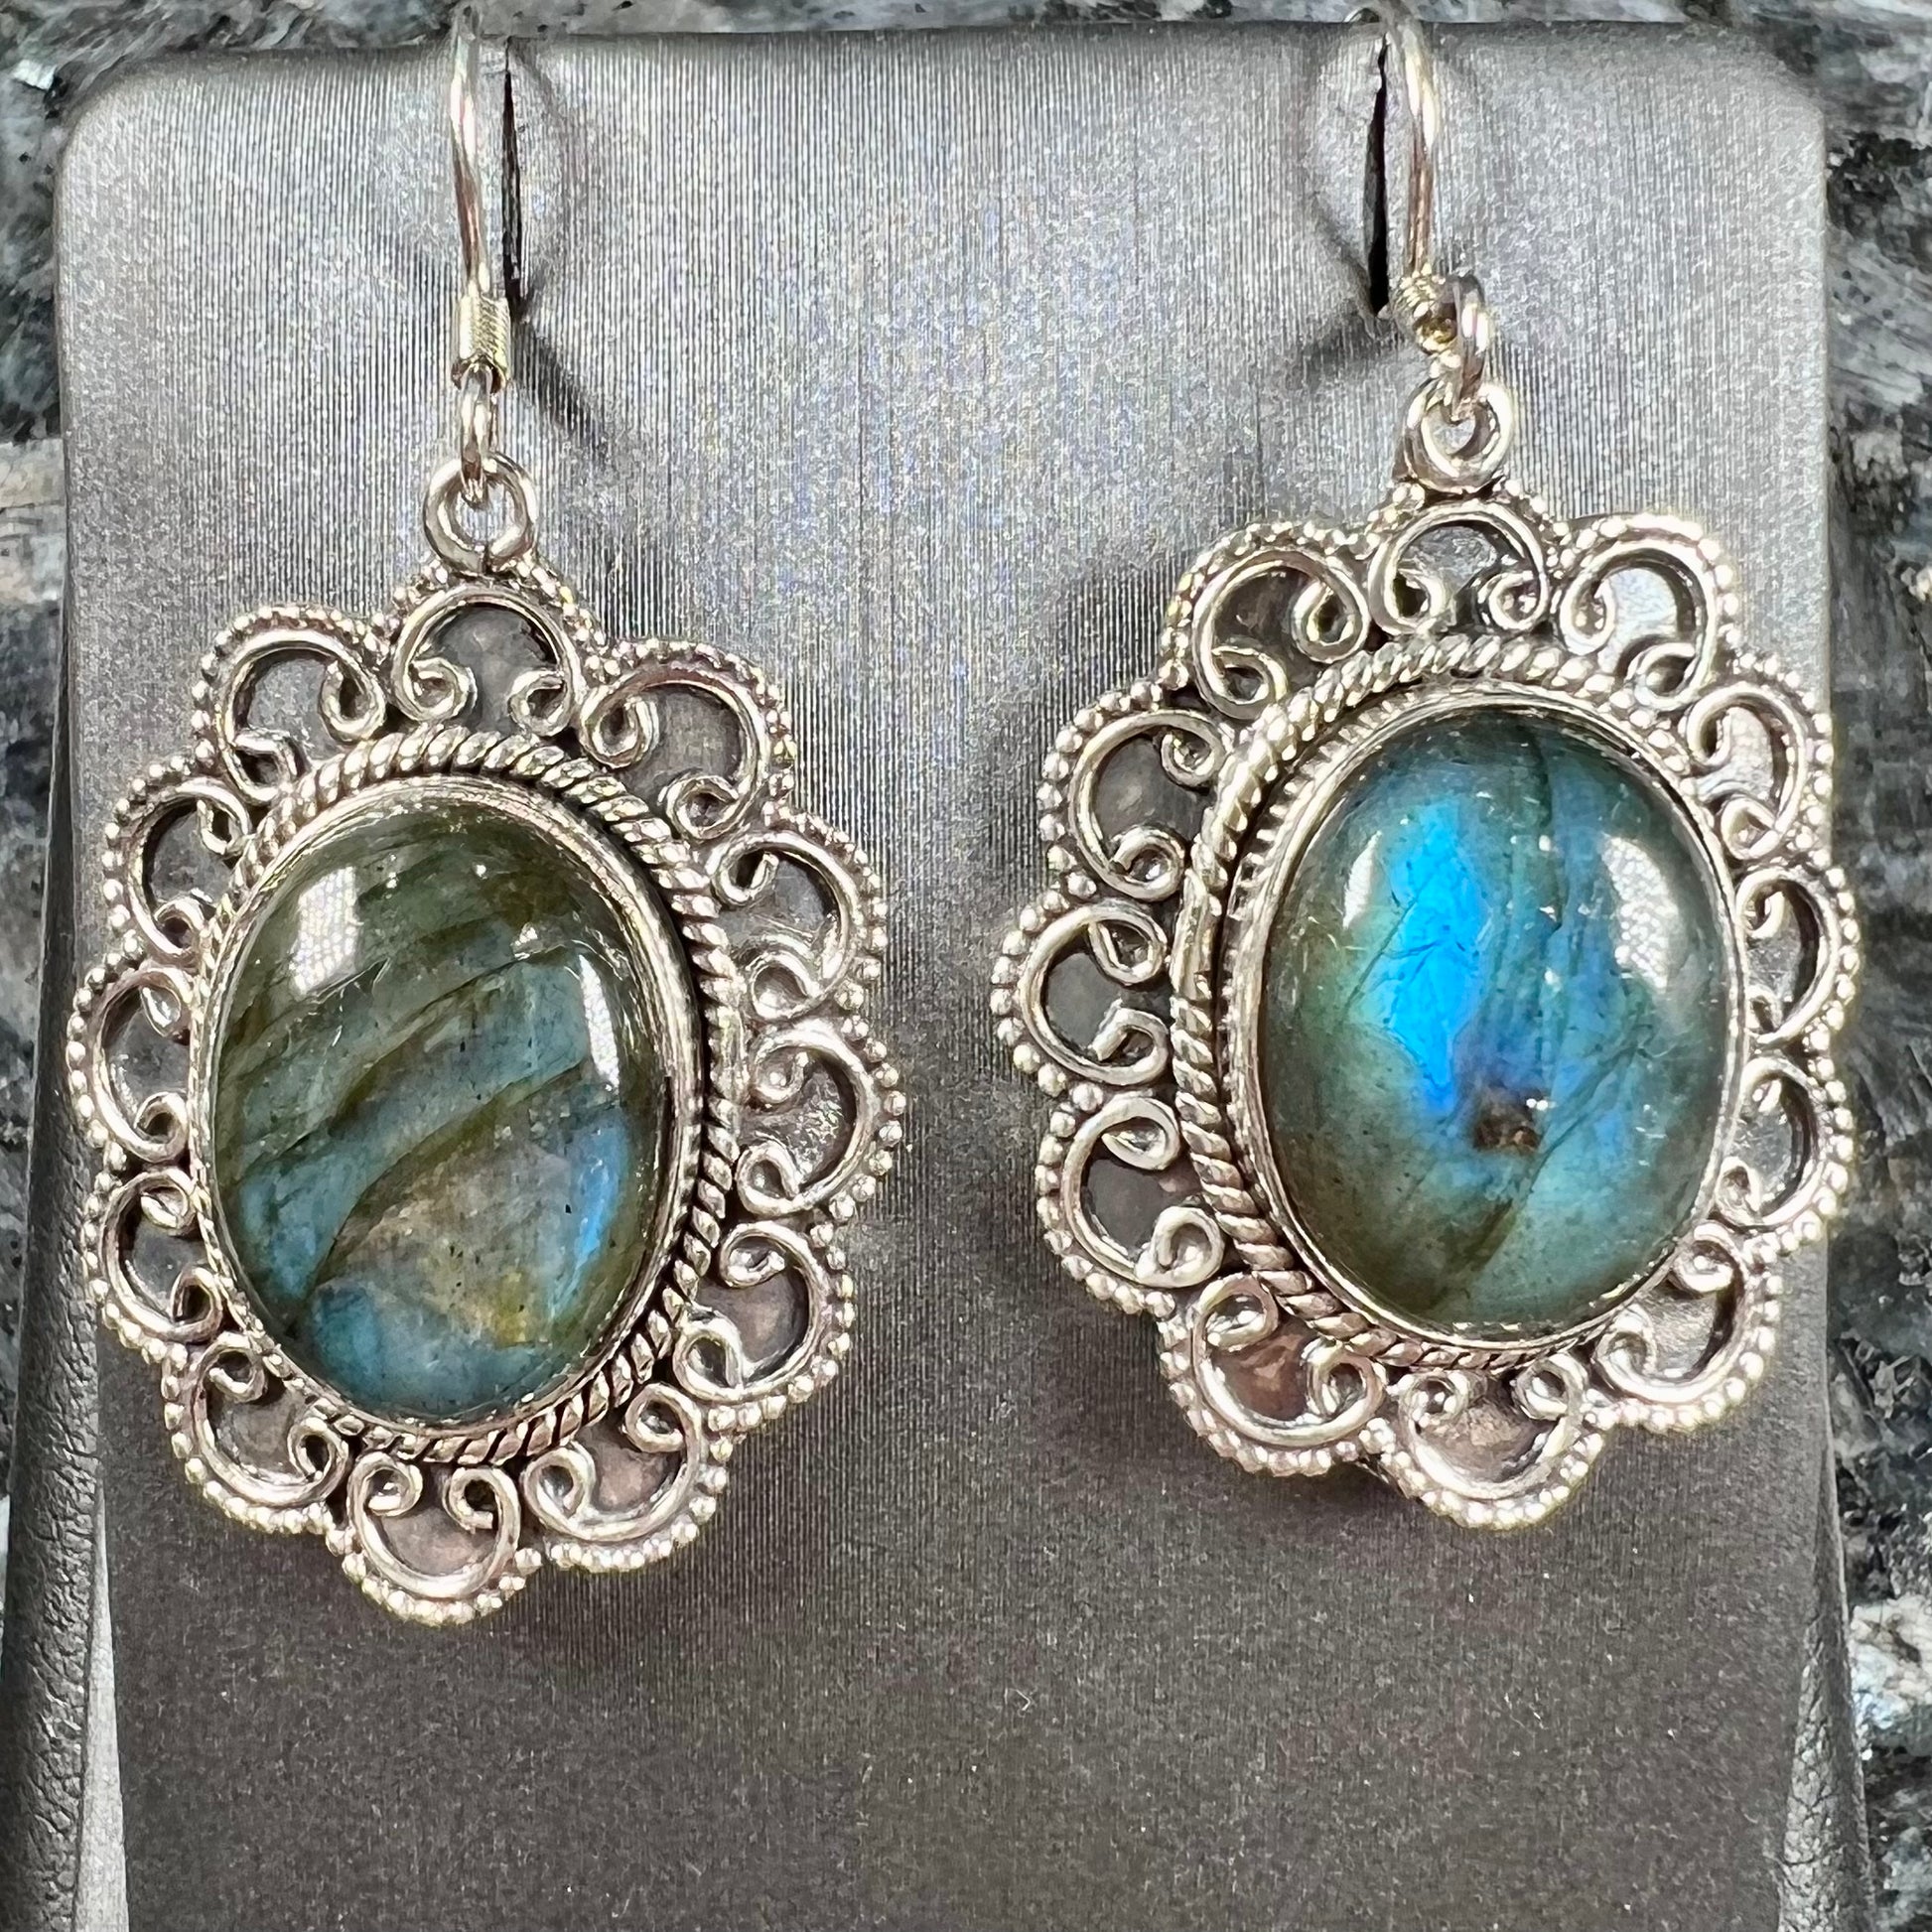 A pair of Southwest style sterling silver labradorite dangle earrings.